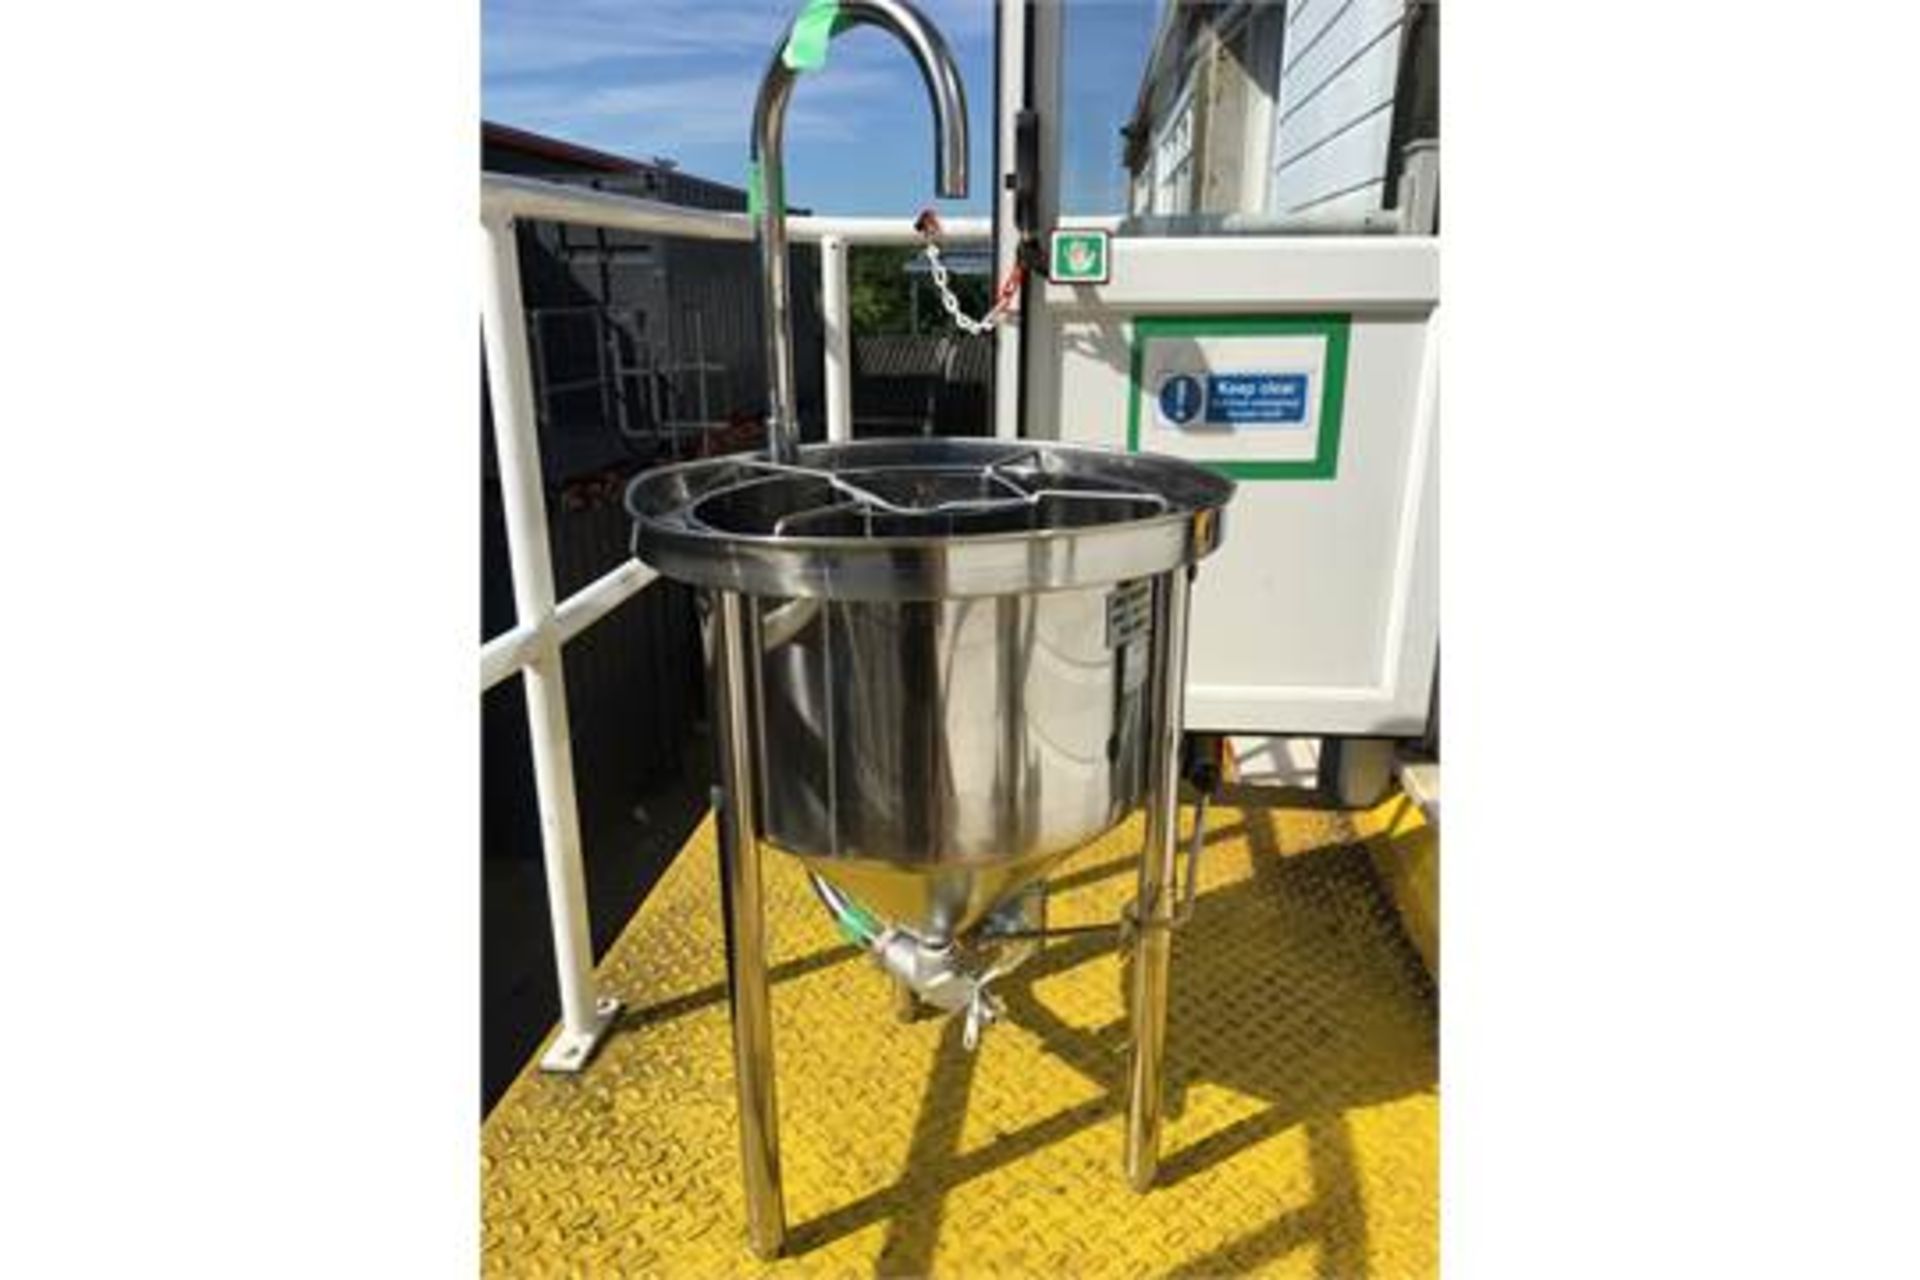 Brand New 22Kg Commercial Rice Washer, Fujimax Model FRW22W - Image 2 of 5